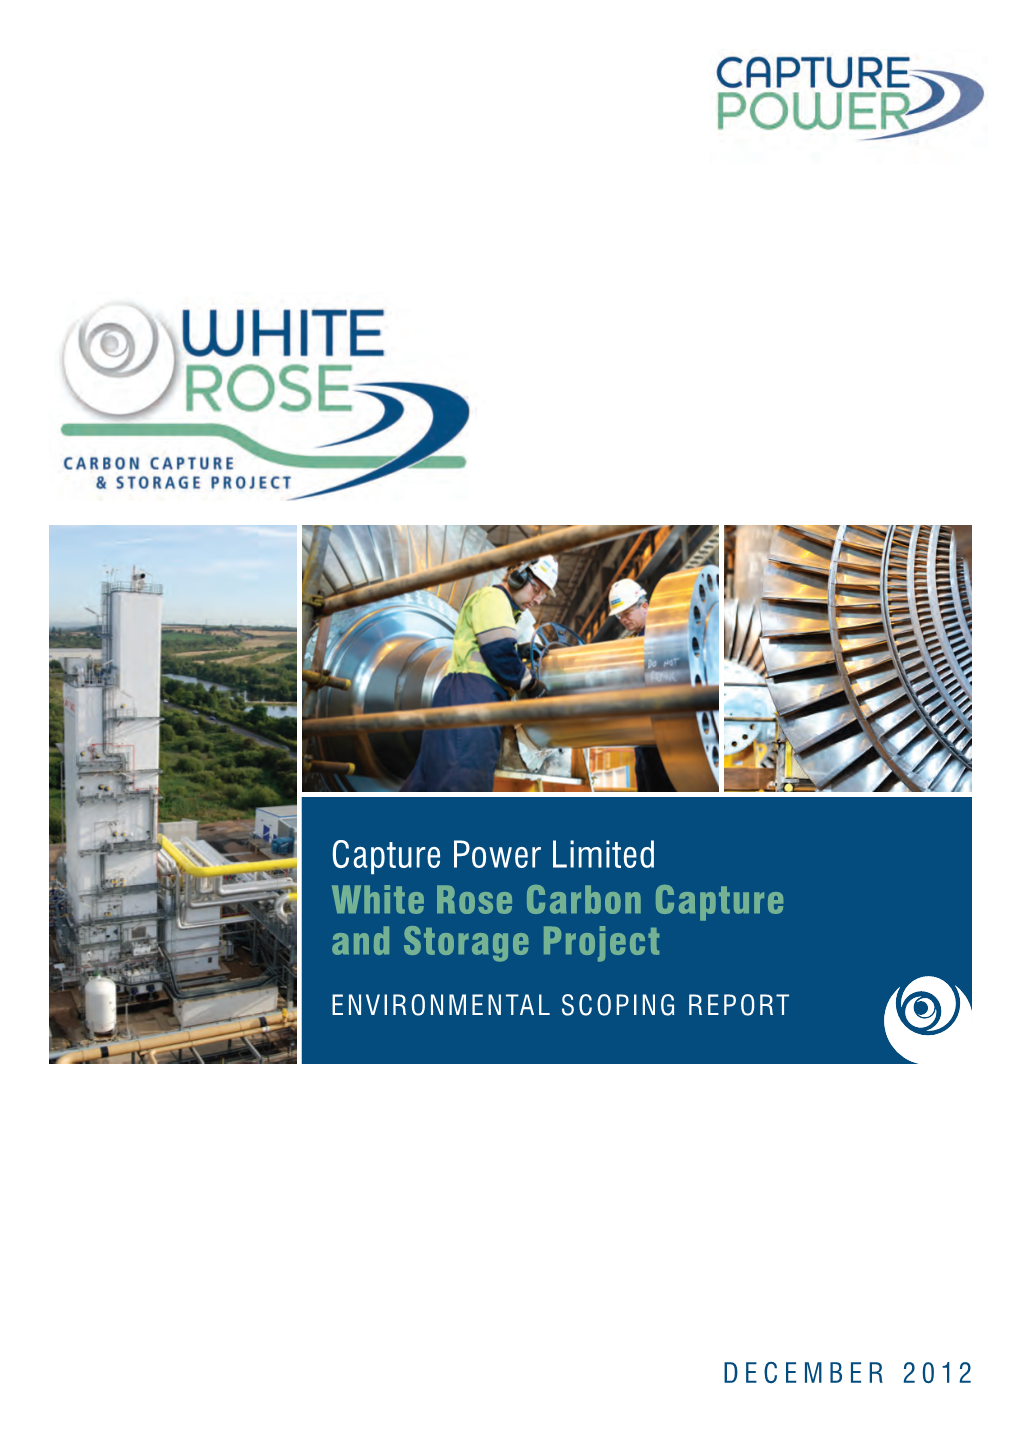 White Rose Carbon Capture and Storage Project